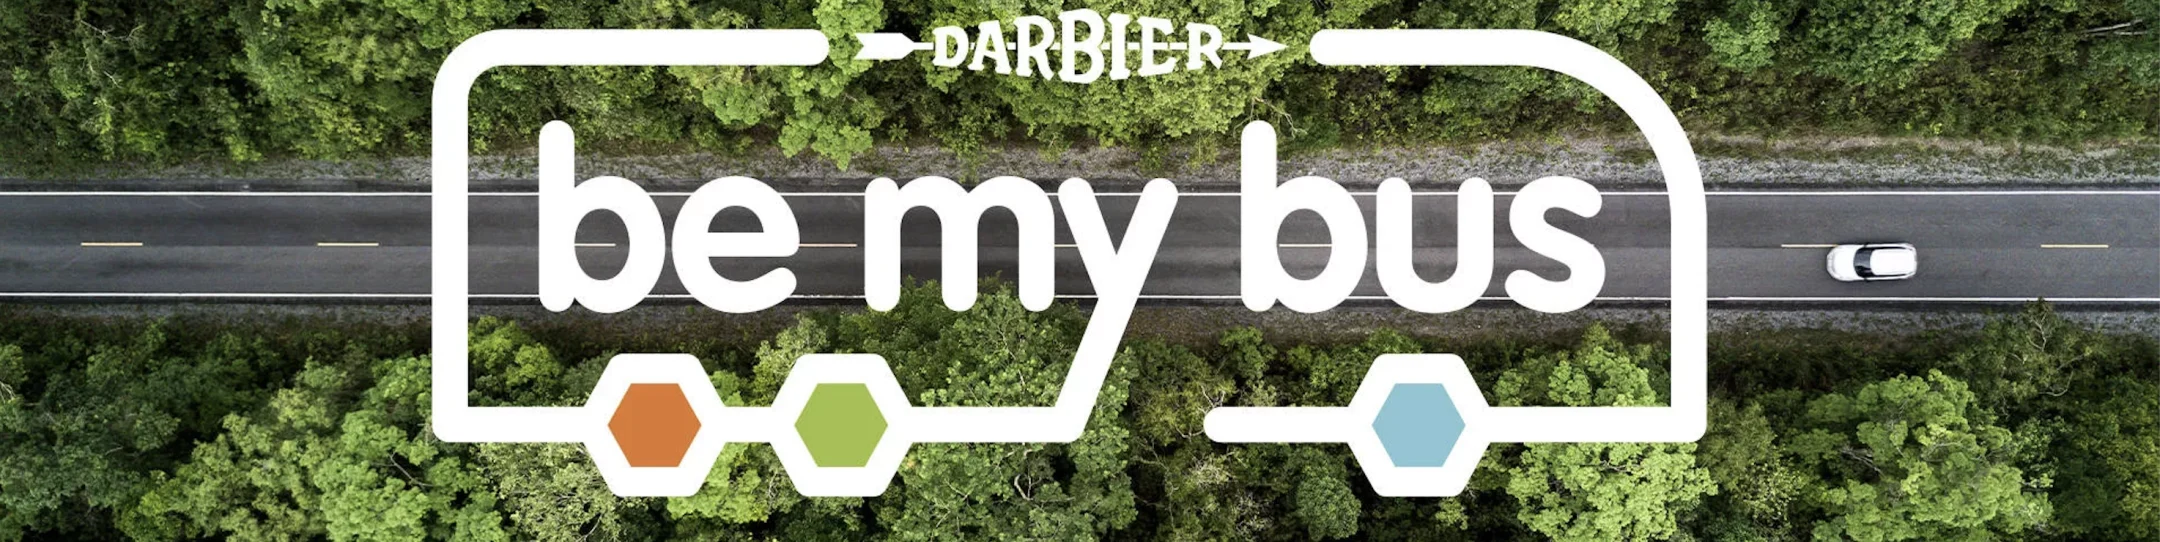 Be My Bus by Darbier Saves Up To 45,000 Liters Of Fuel Per Year With Samsara